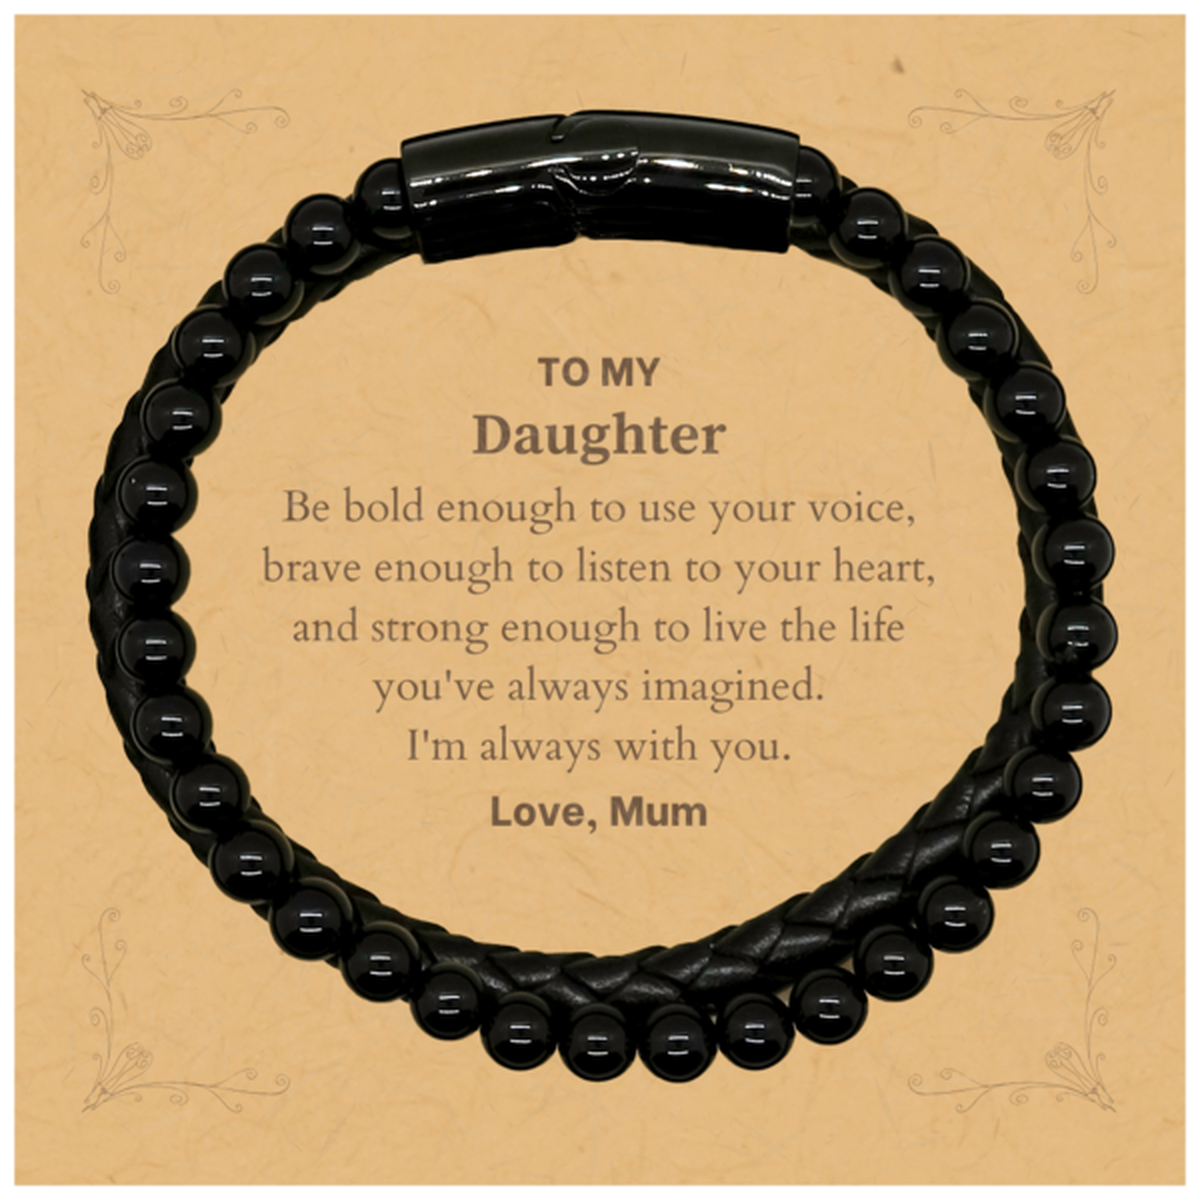 Keepsake Daughter Stone Leather Bracelets Gift Idea Graduation Christmas Birthday Daughter from Mum, Daughter Be bold enough to use your voice, brave enough to listen to your heart. Love, Mum